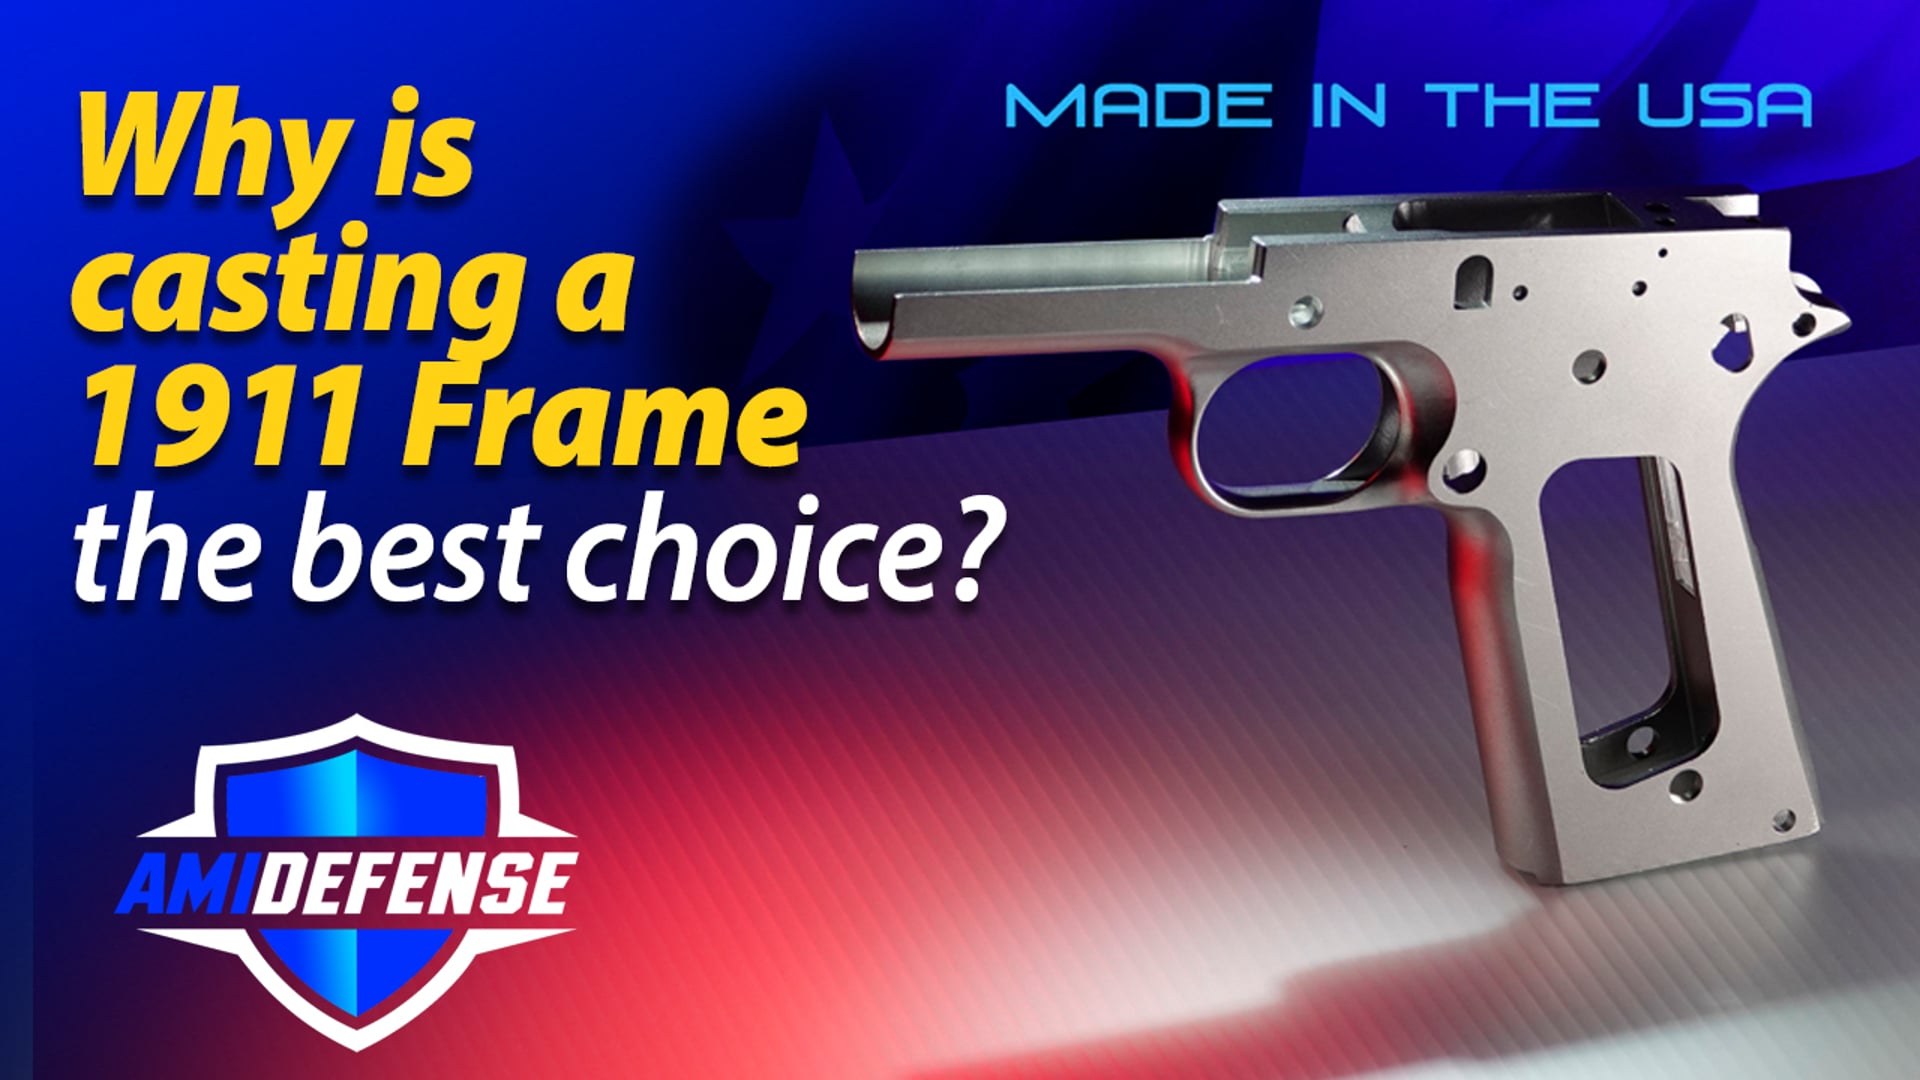 Why is a cast 1911 frame so much better?